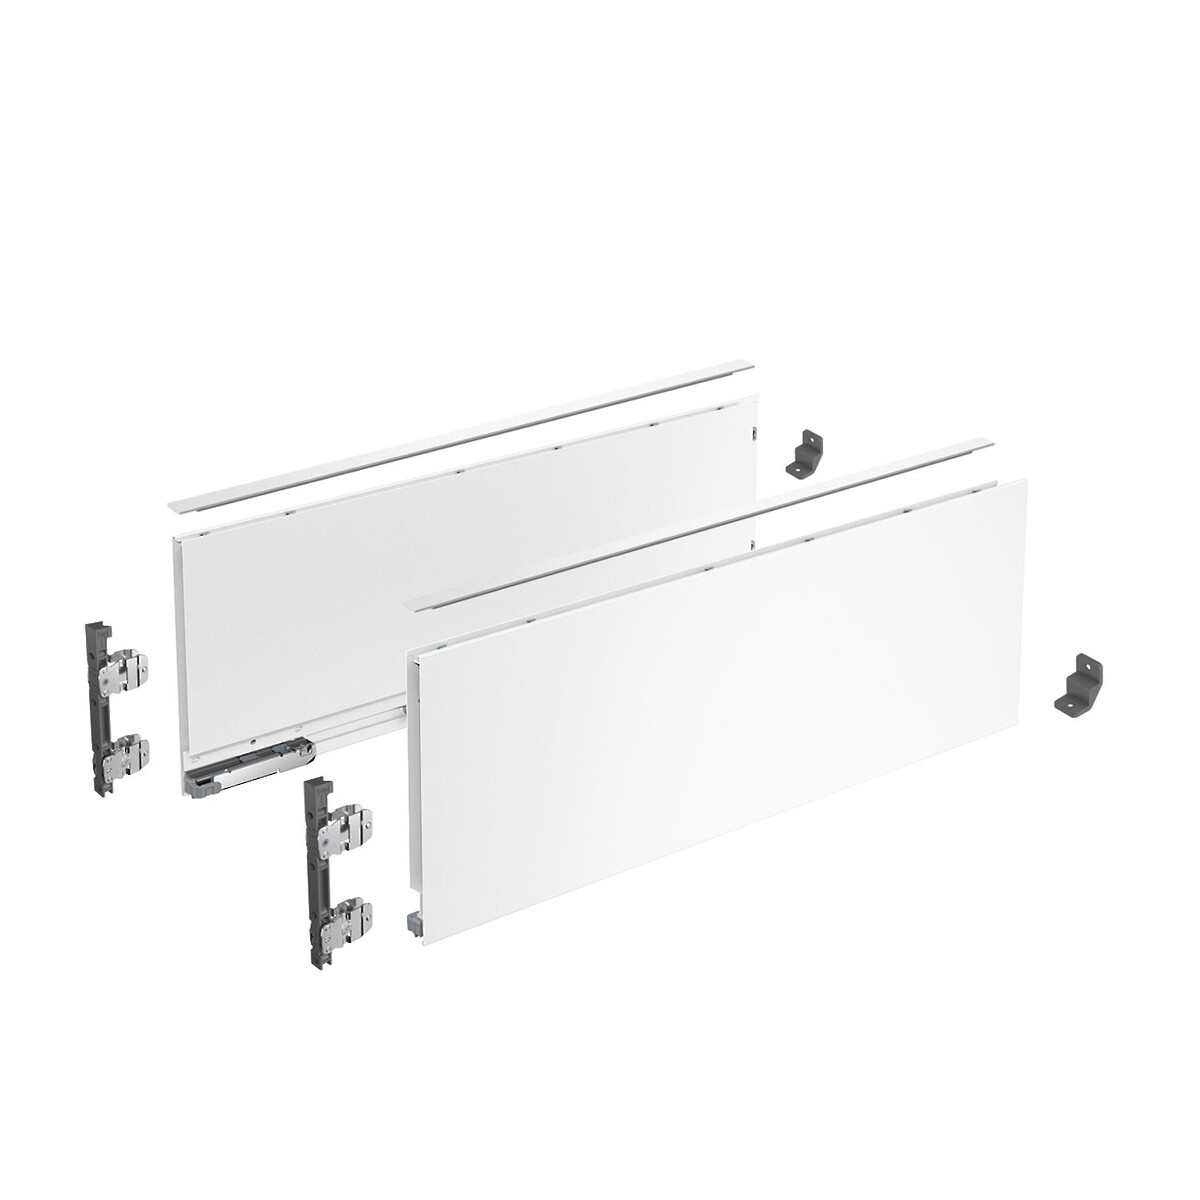 AvanTech YOU Drawer side profile set, height 187 mm x NL 350 mm, White, Left and Right